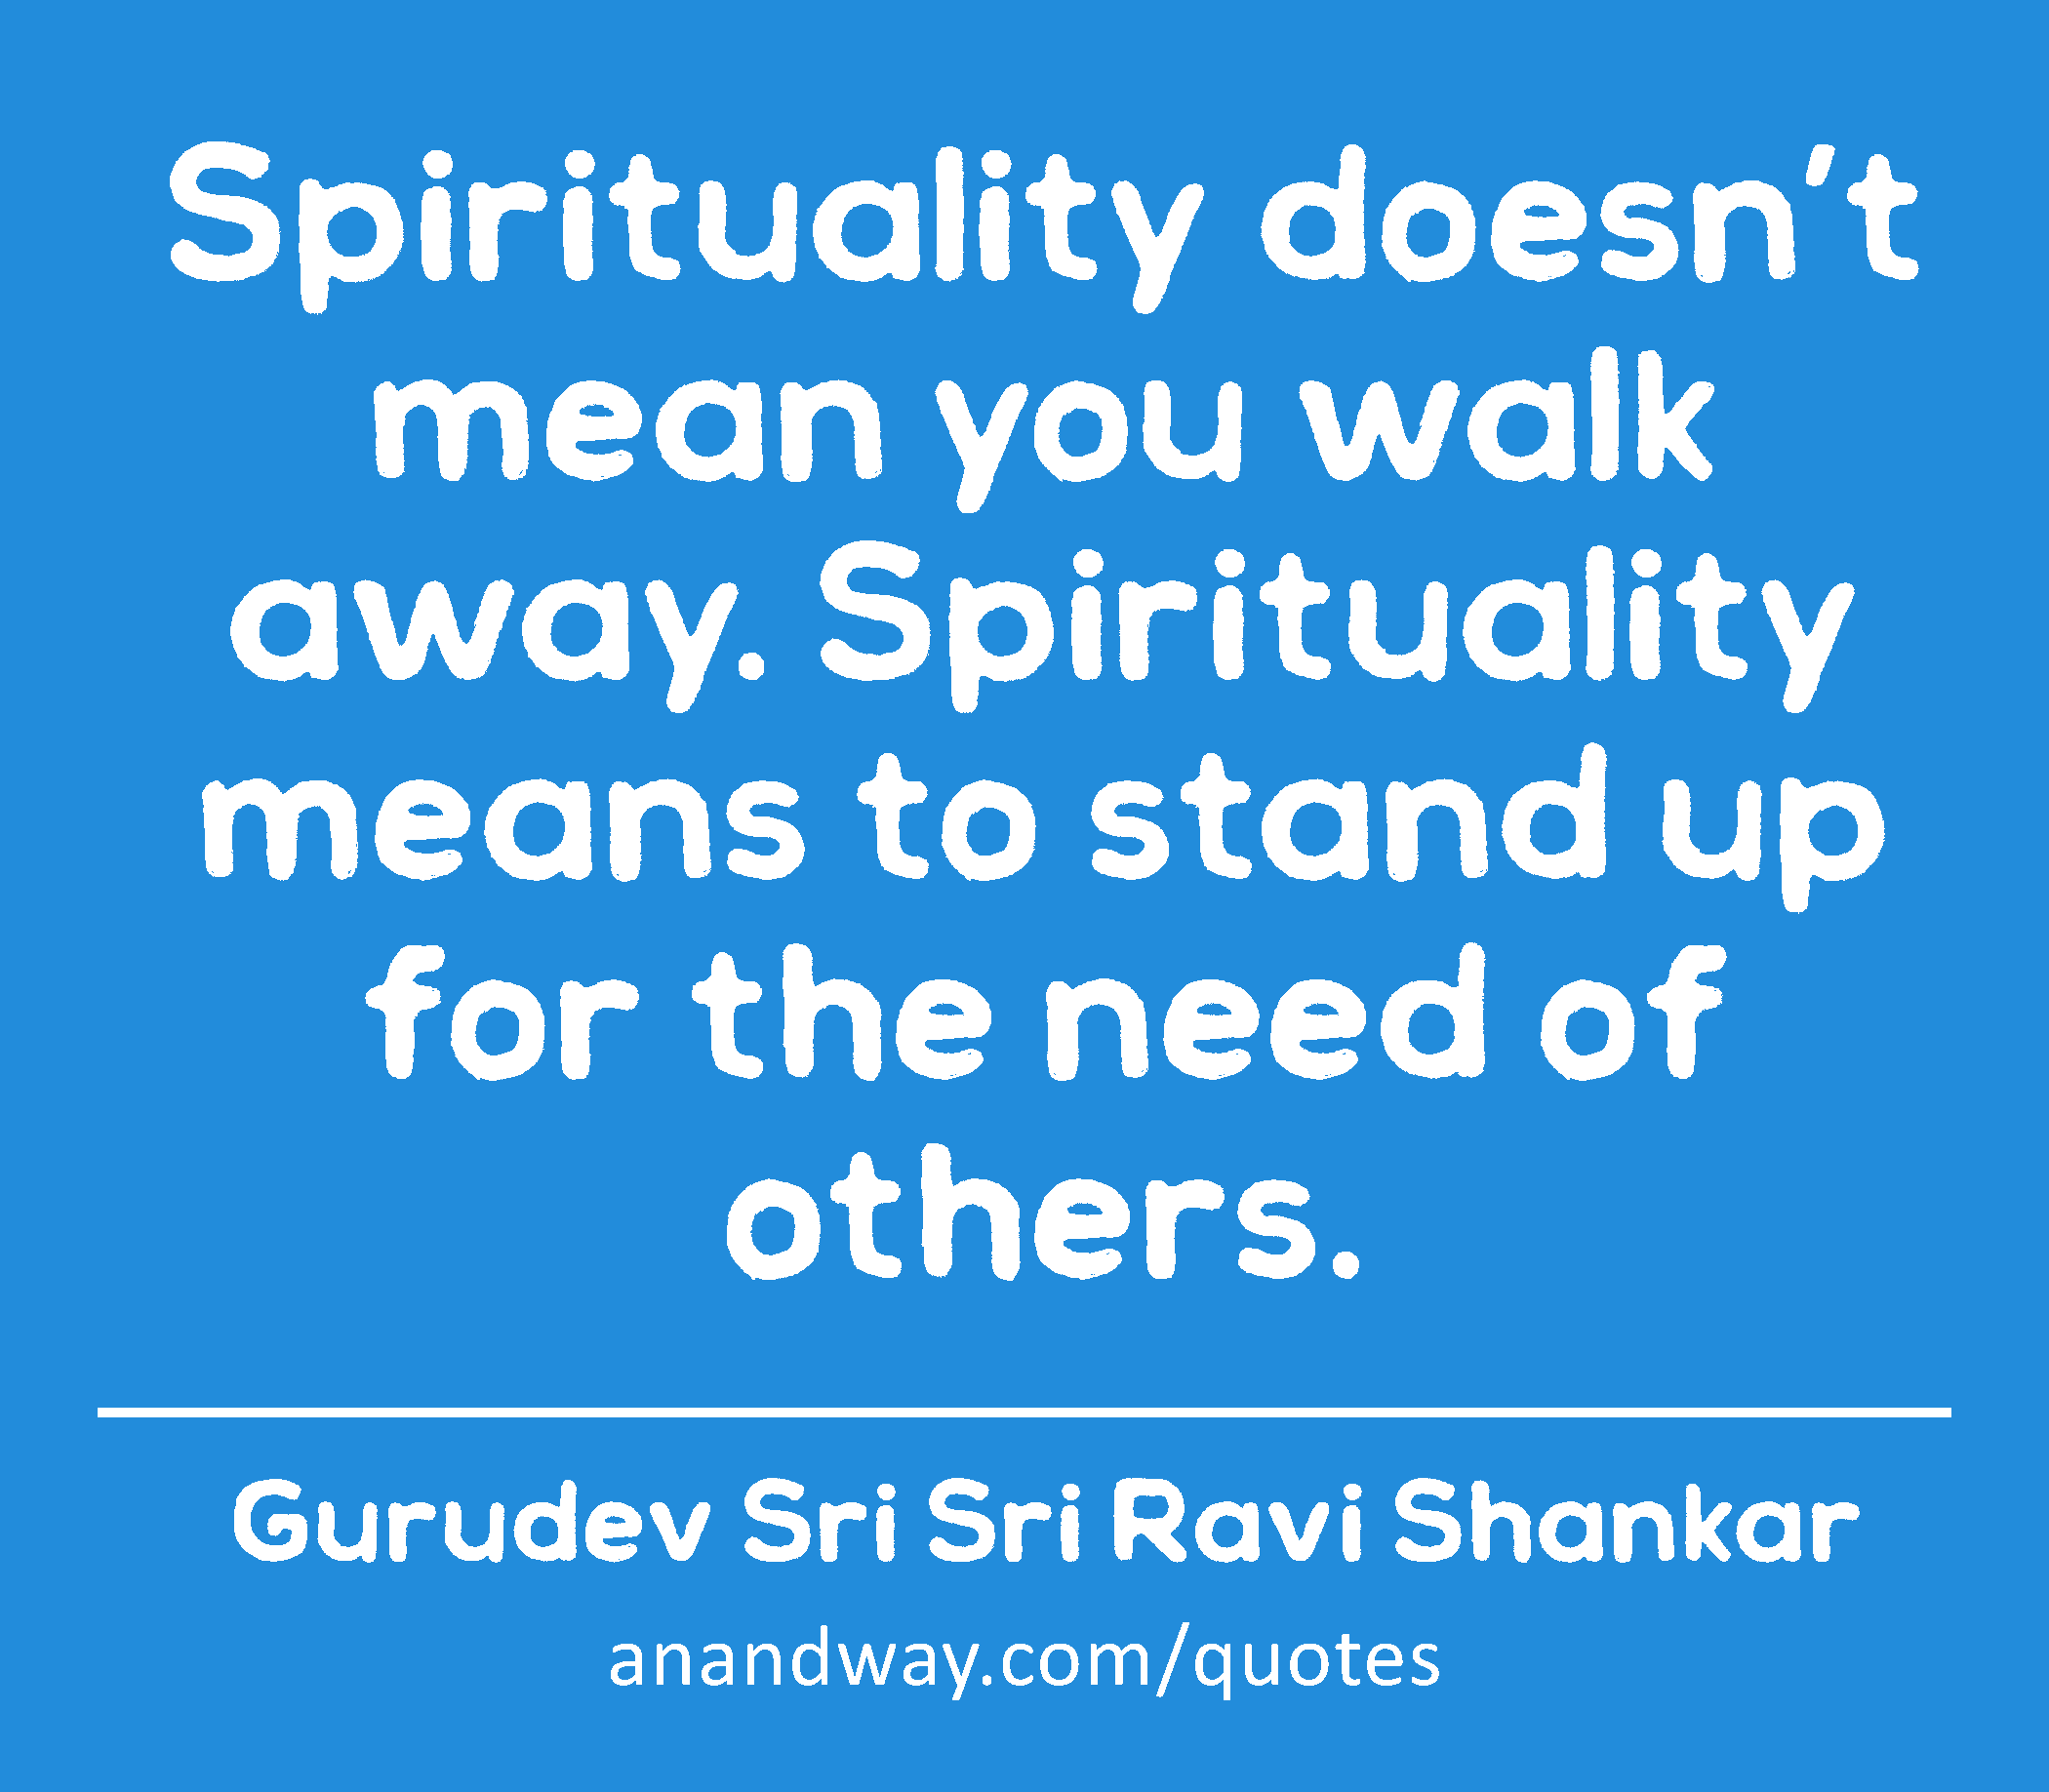 Spirituality doesn’t mean you walk away. Spirituality means to stand up for the need of others. 
 -Gurudev Sri Sri Ravi Shankar